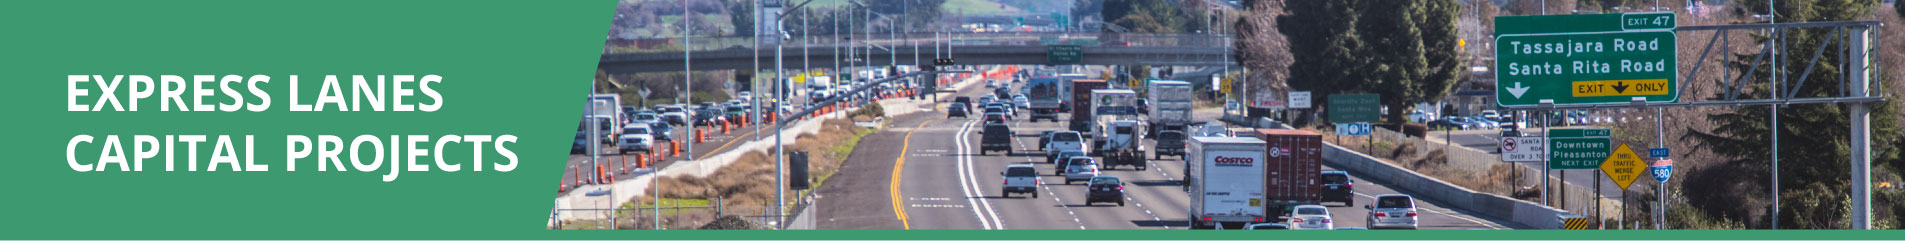 Express Lanes Capital Projects